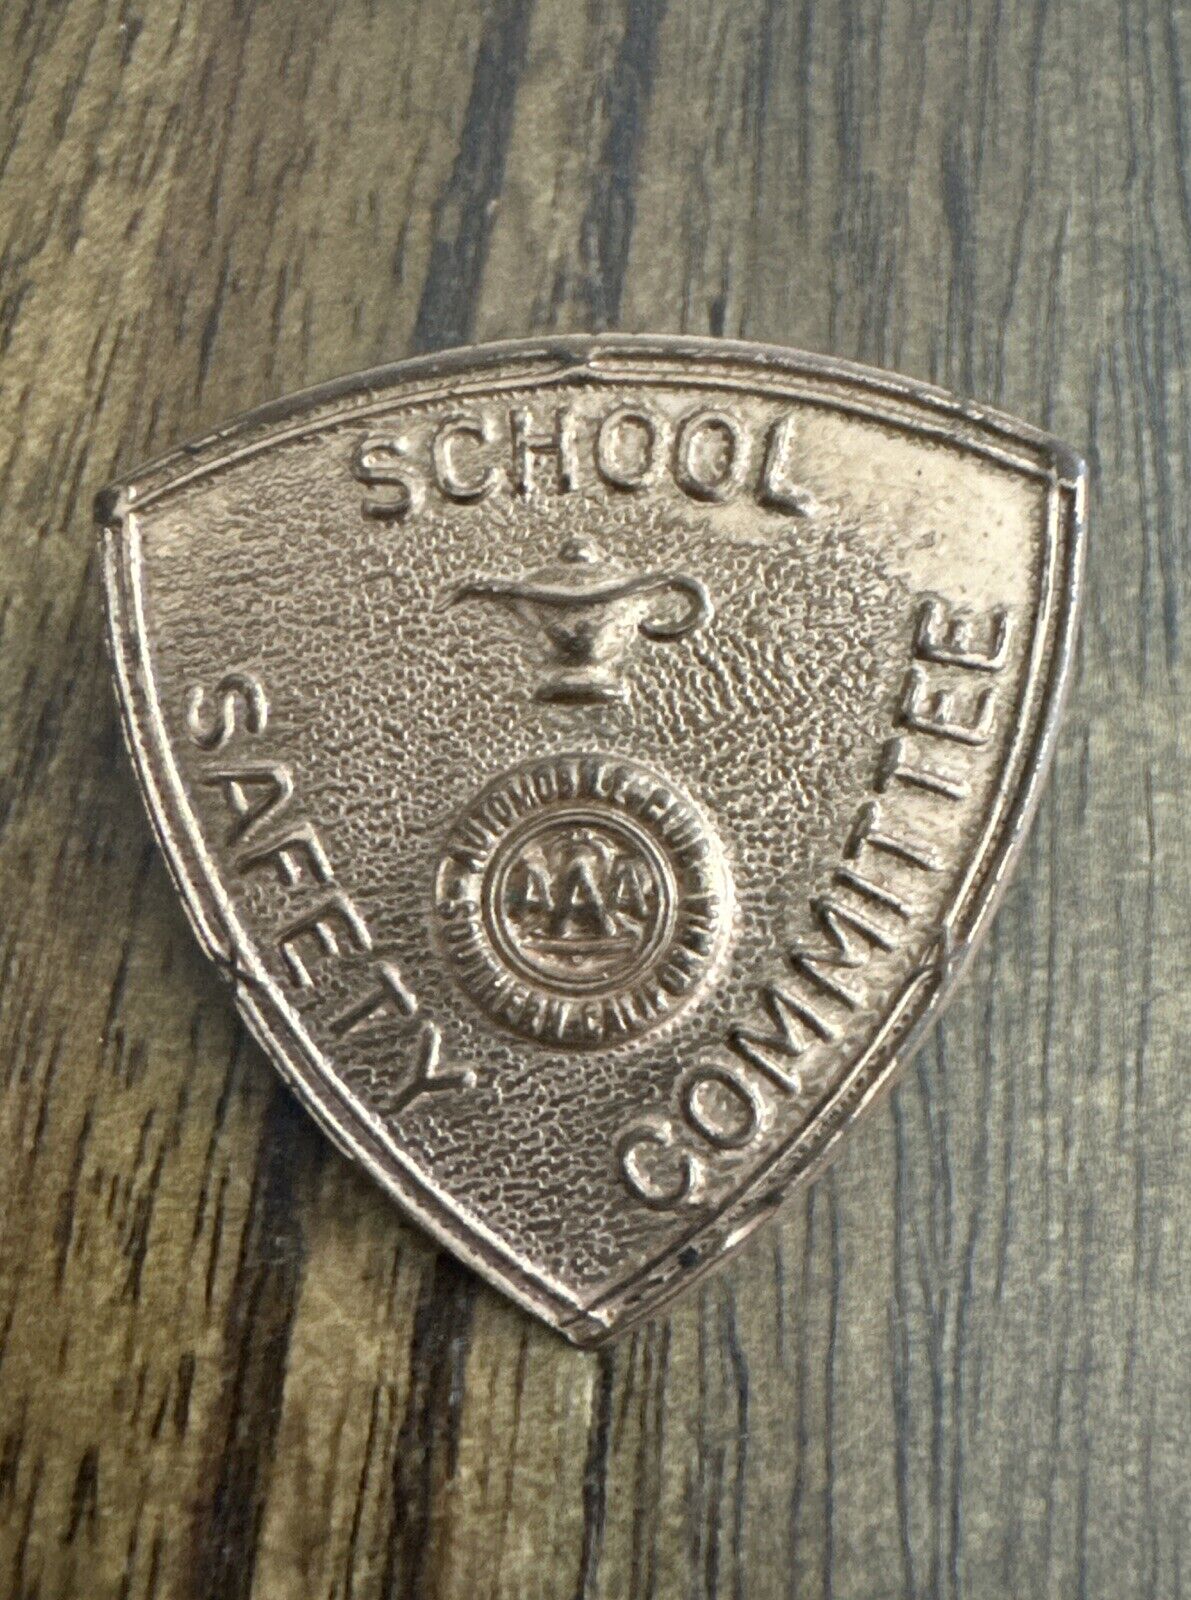 Vintage - AAA Southern Auto Club - School Safety Committee Badge